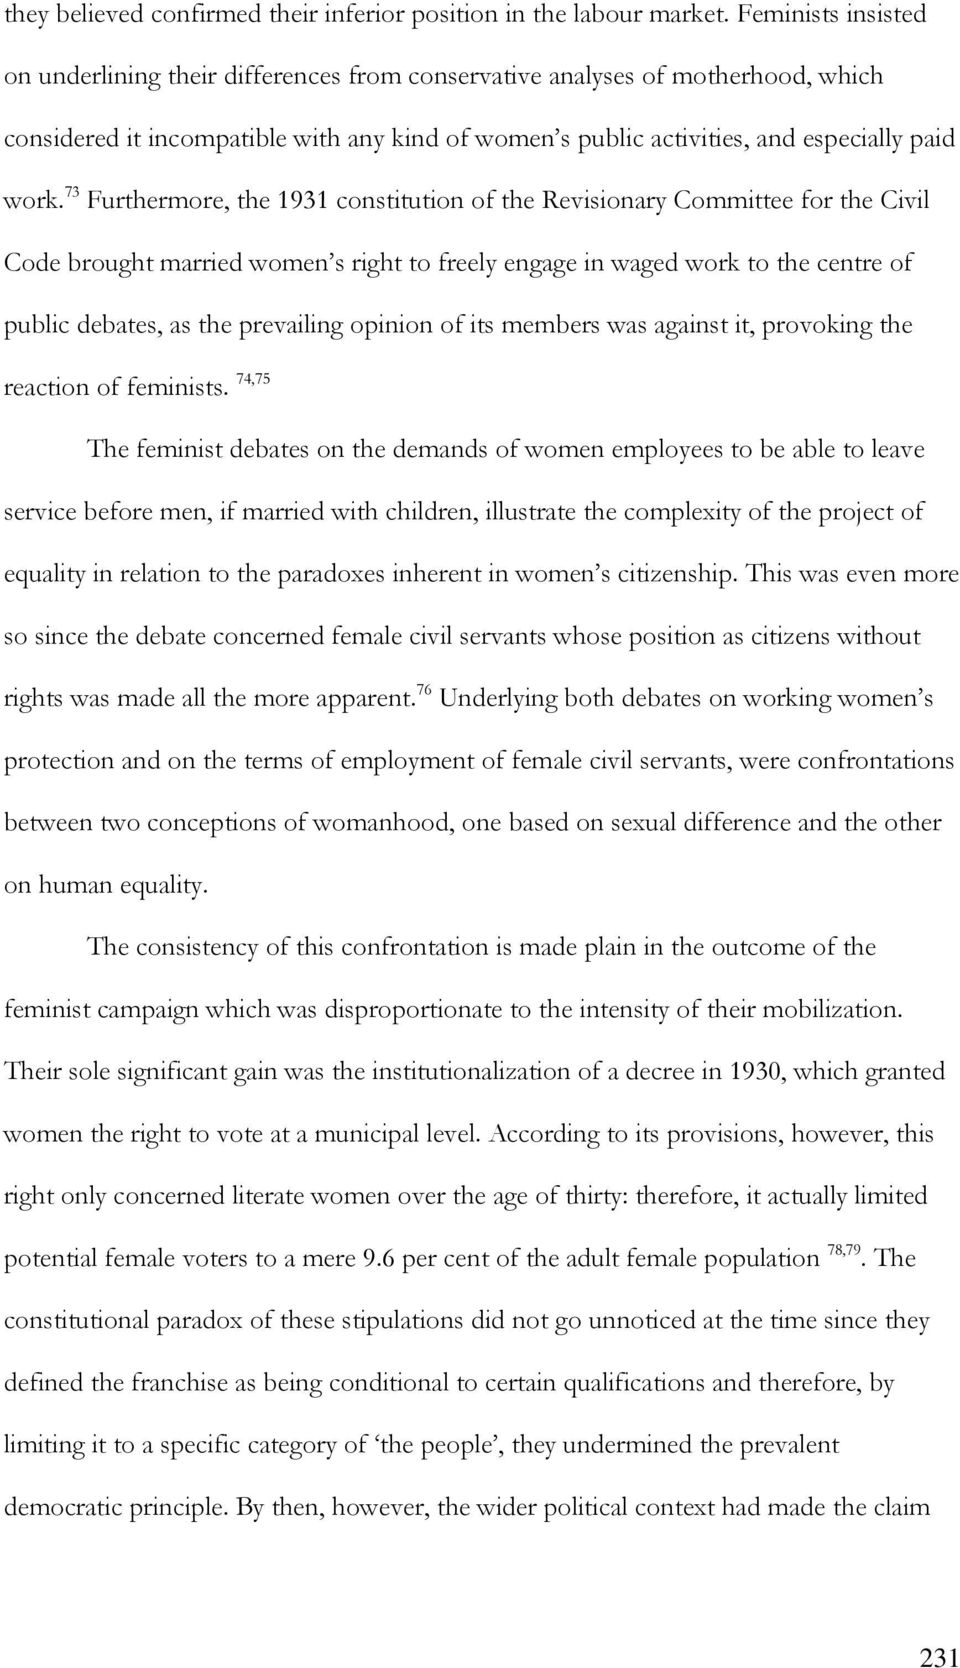 73 Furthermore, the 1931 constitution of the Revisionary Committee for the Civil Code brought married women s right to freely engage in waged work to the centre of public debates, as the prevailing